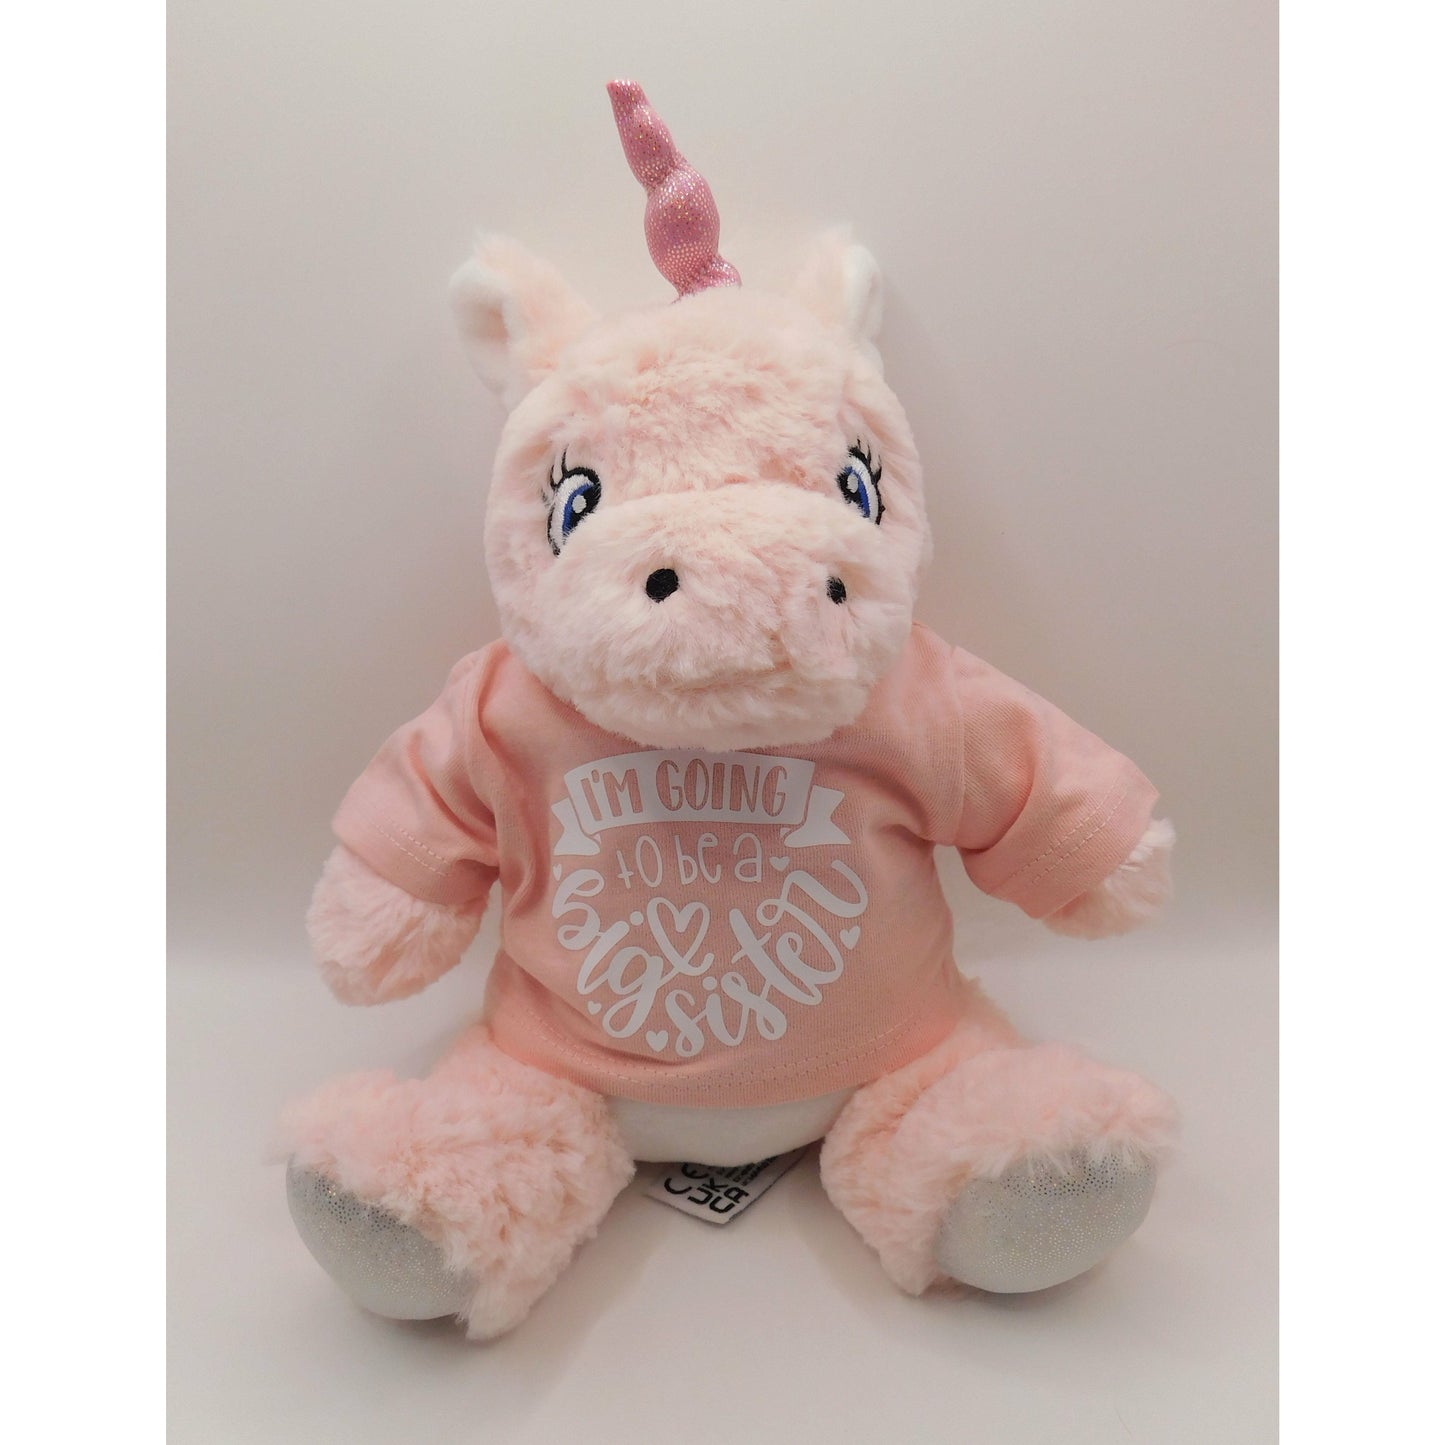 'I'm going to be a Big sister' teddy bear/ sibling gifts/ new baby/ adoption